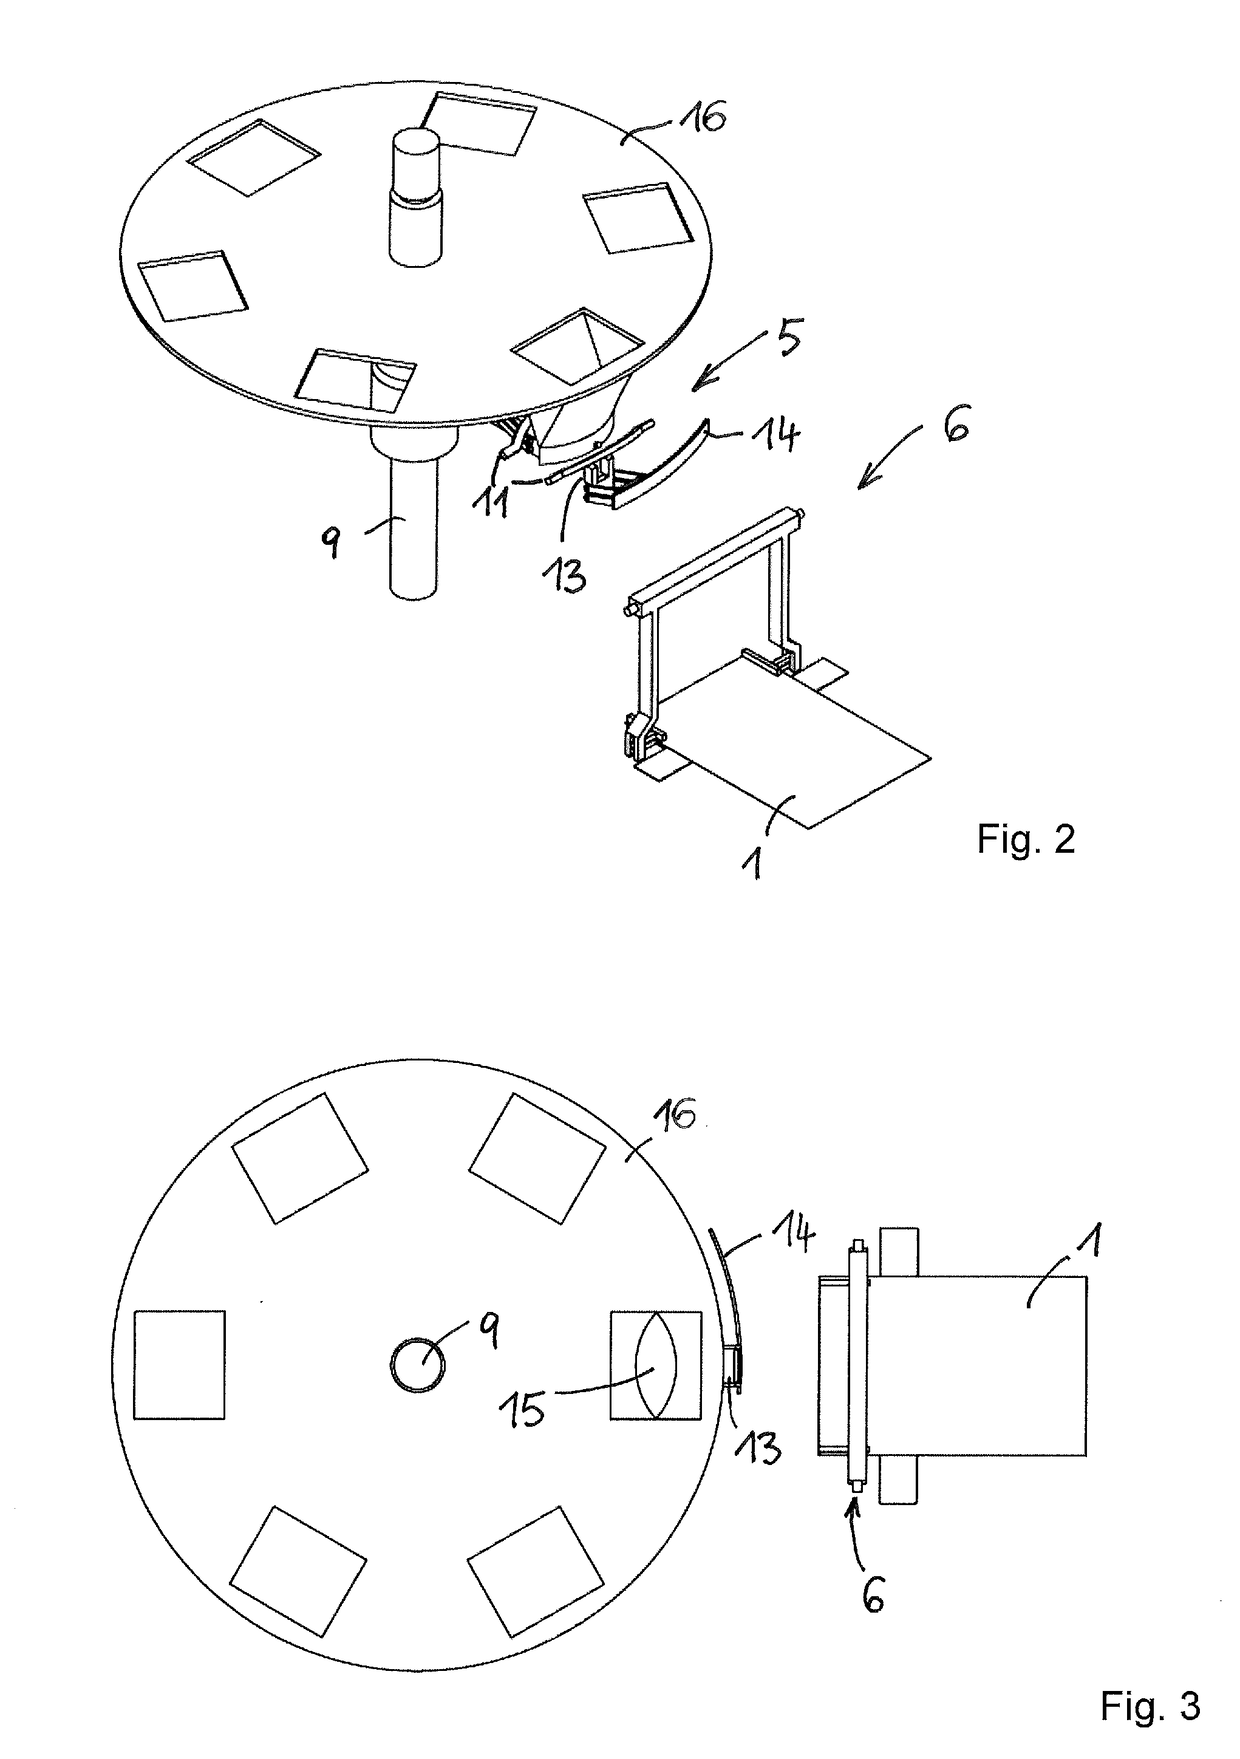 Device and method for transporting bags